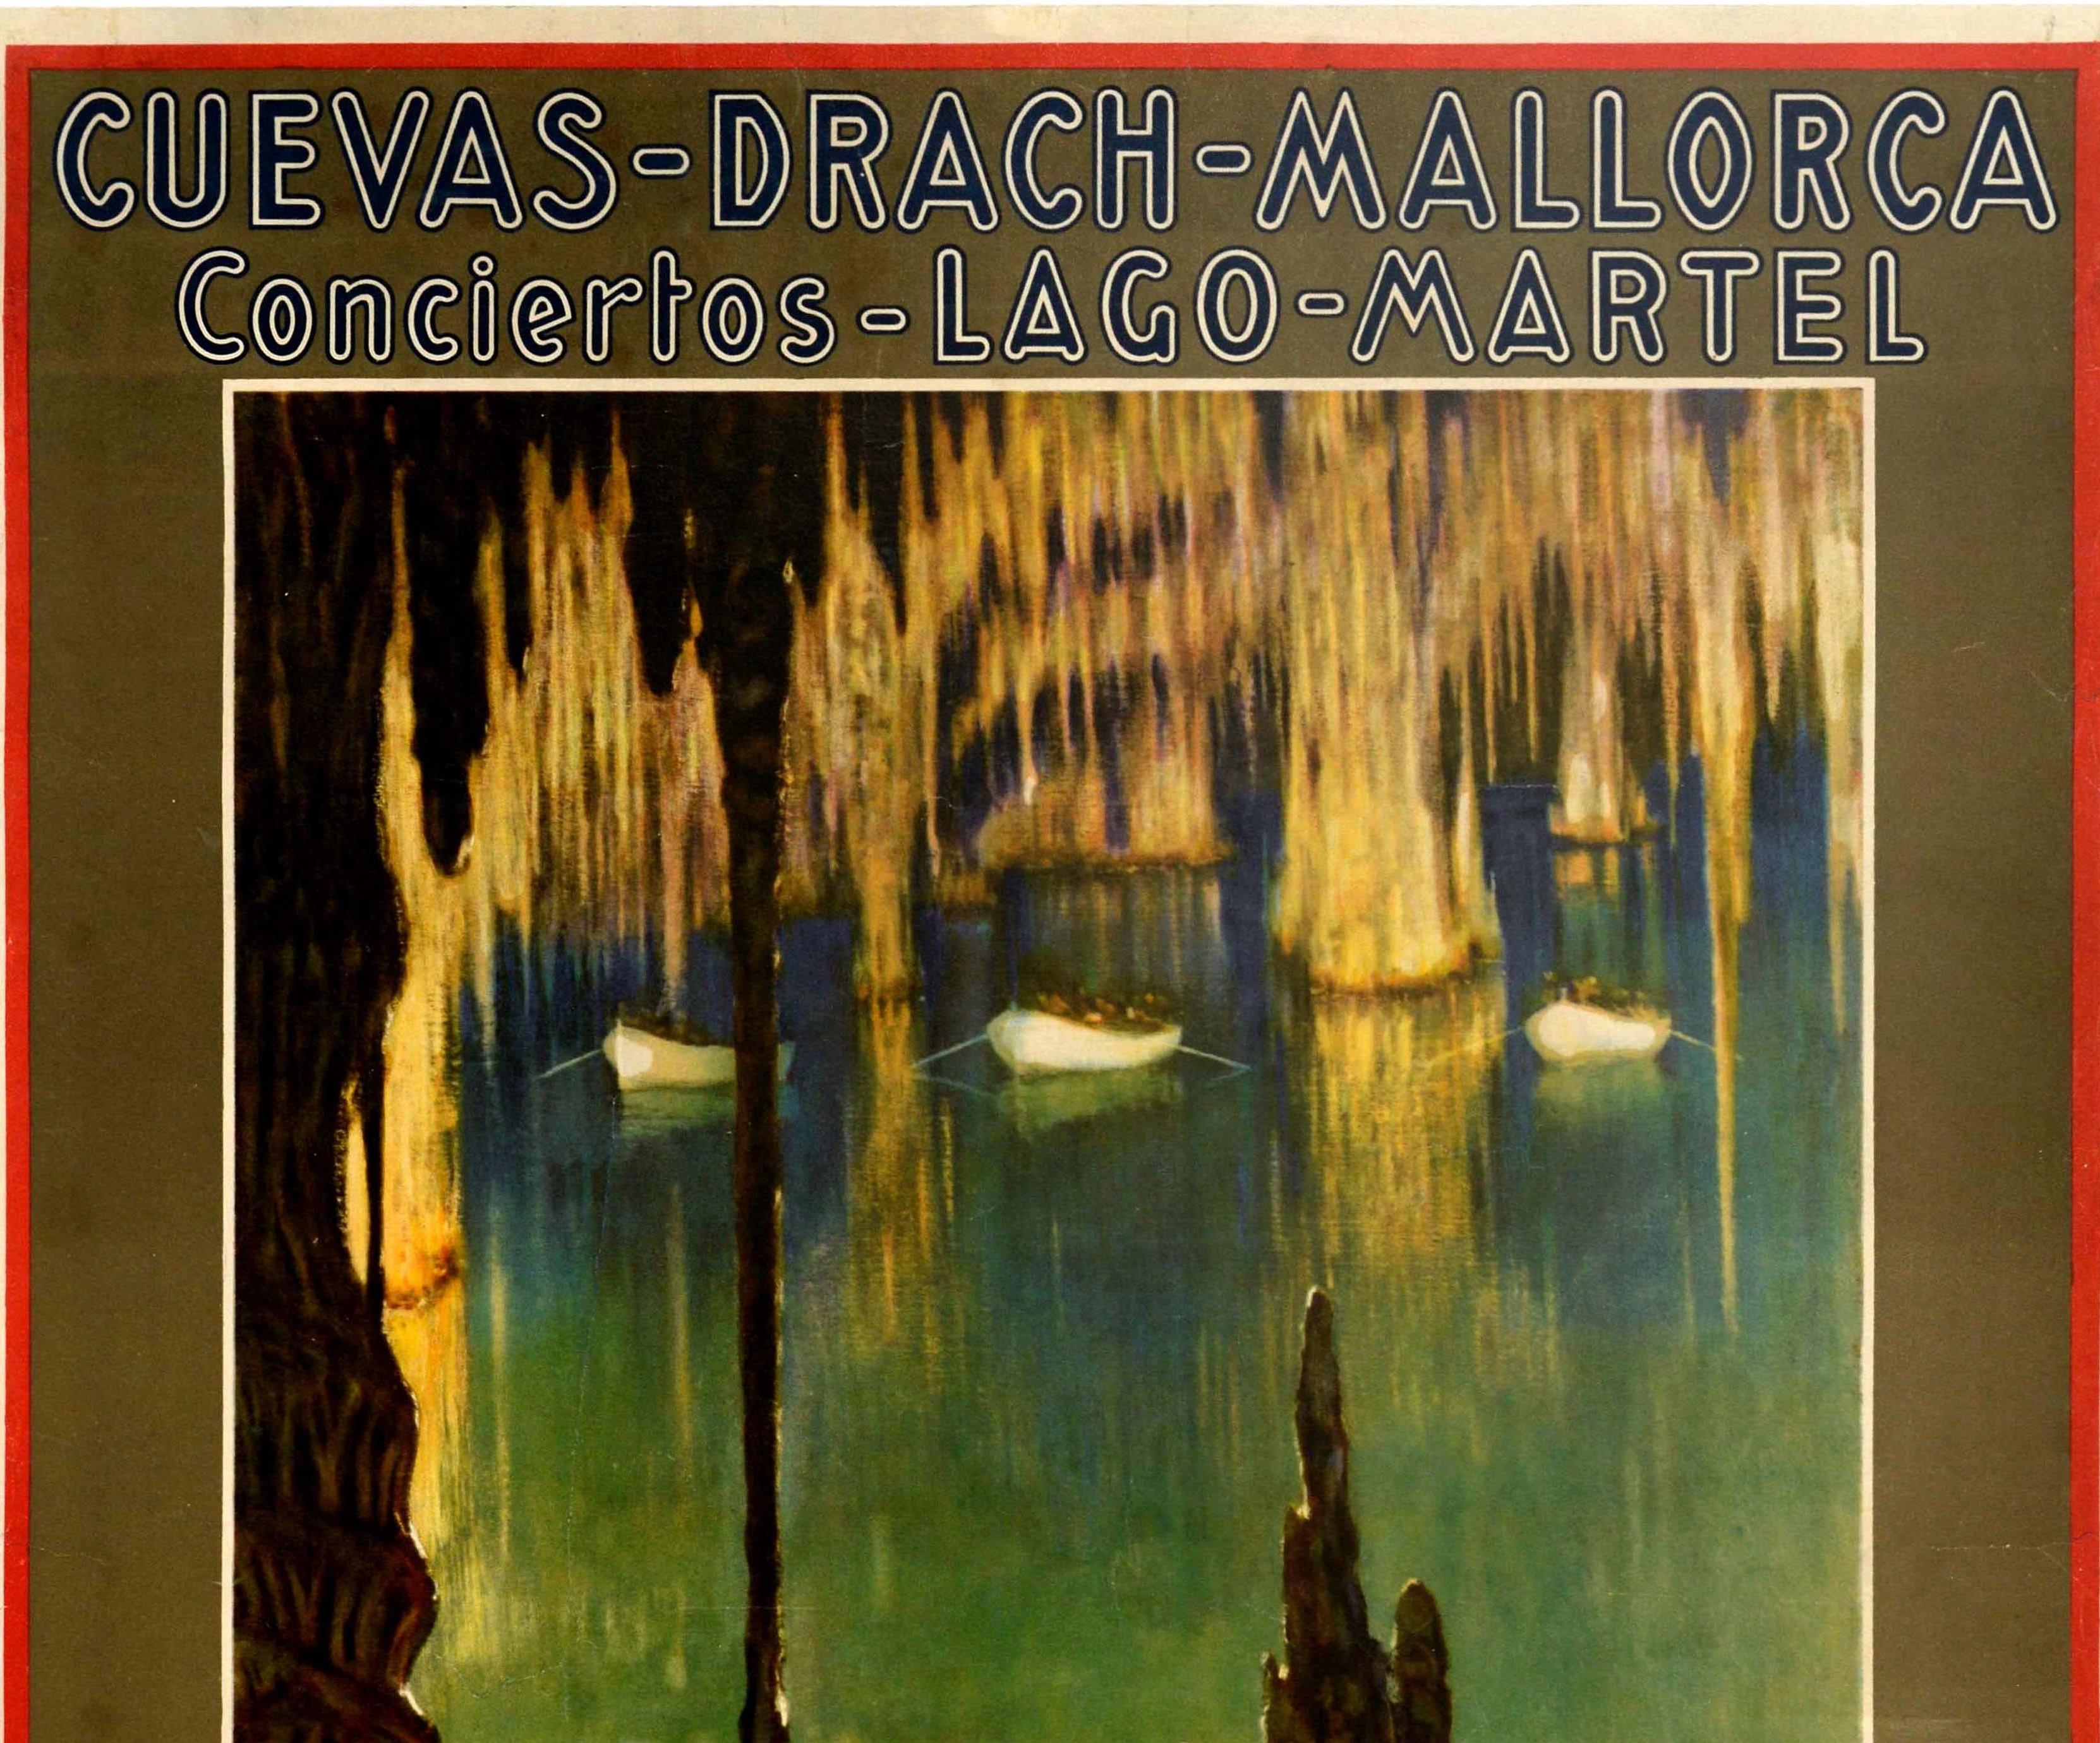 Original vintage travel poster for the Caves of Drach Mallorca Lake Martel Concerts / Cuevas Drach Mallorca Conciertos Lago Martel issued by the Fomento Turismo de Palma tourist office featuring stunning artwork by the Austrian painter Erwin Hubert